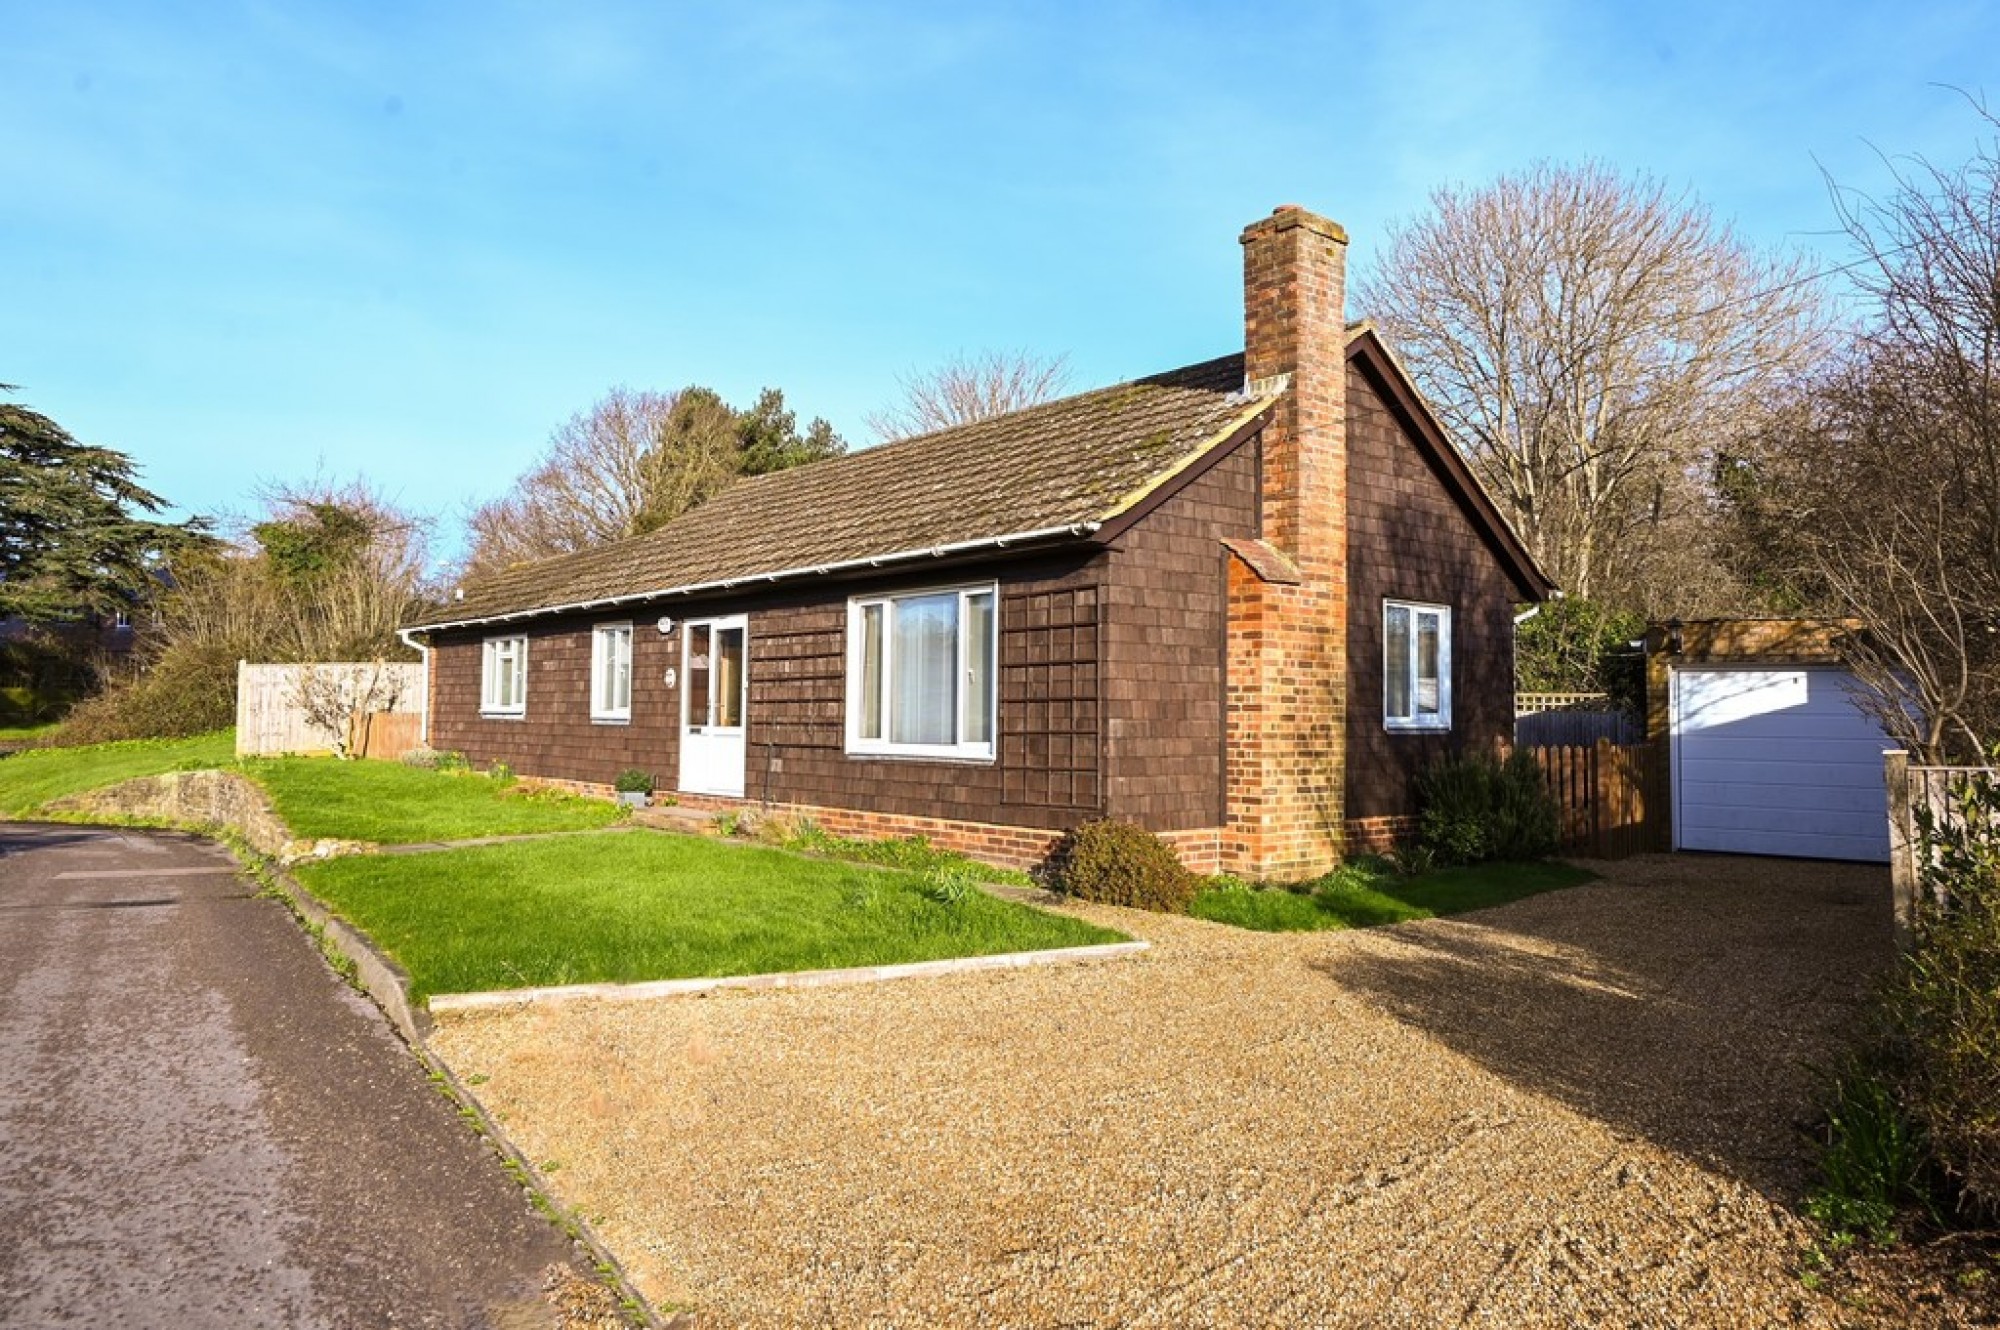 Images for Saltcote Lane, Playden, East Sussex TN31 7NR